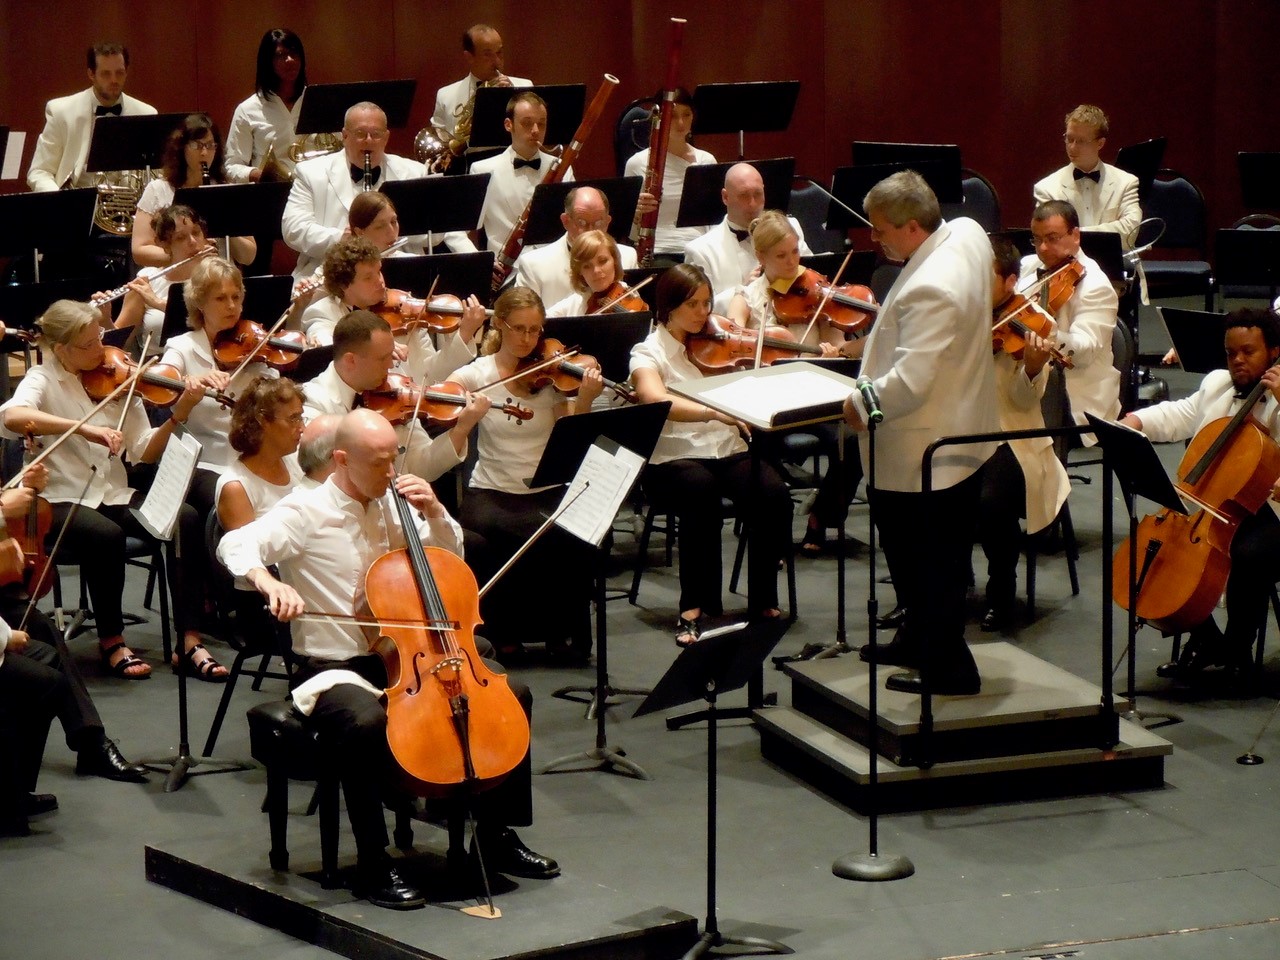 An orchestra is playing instruments